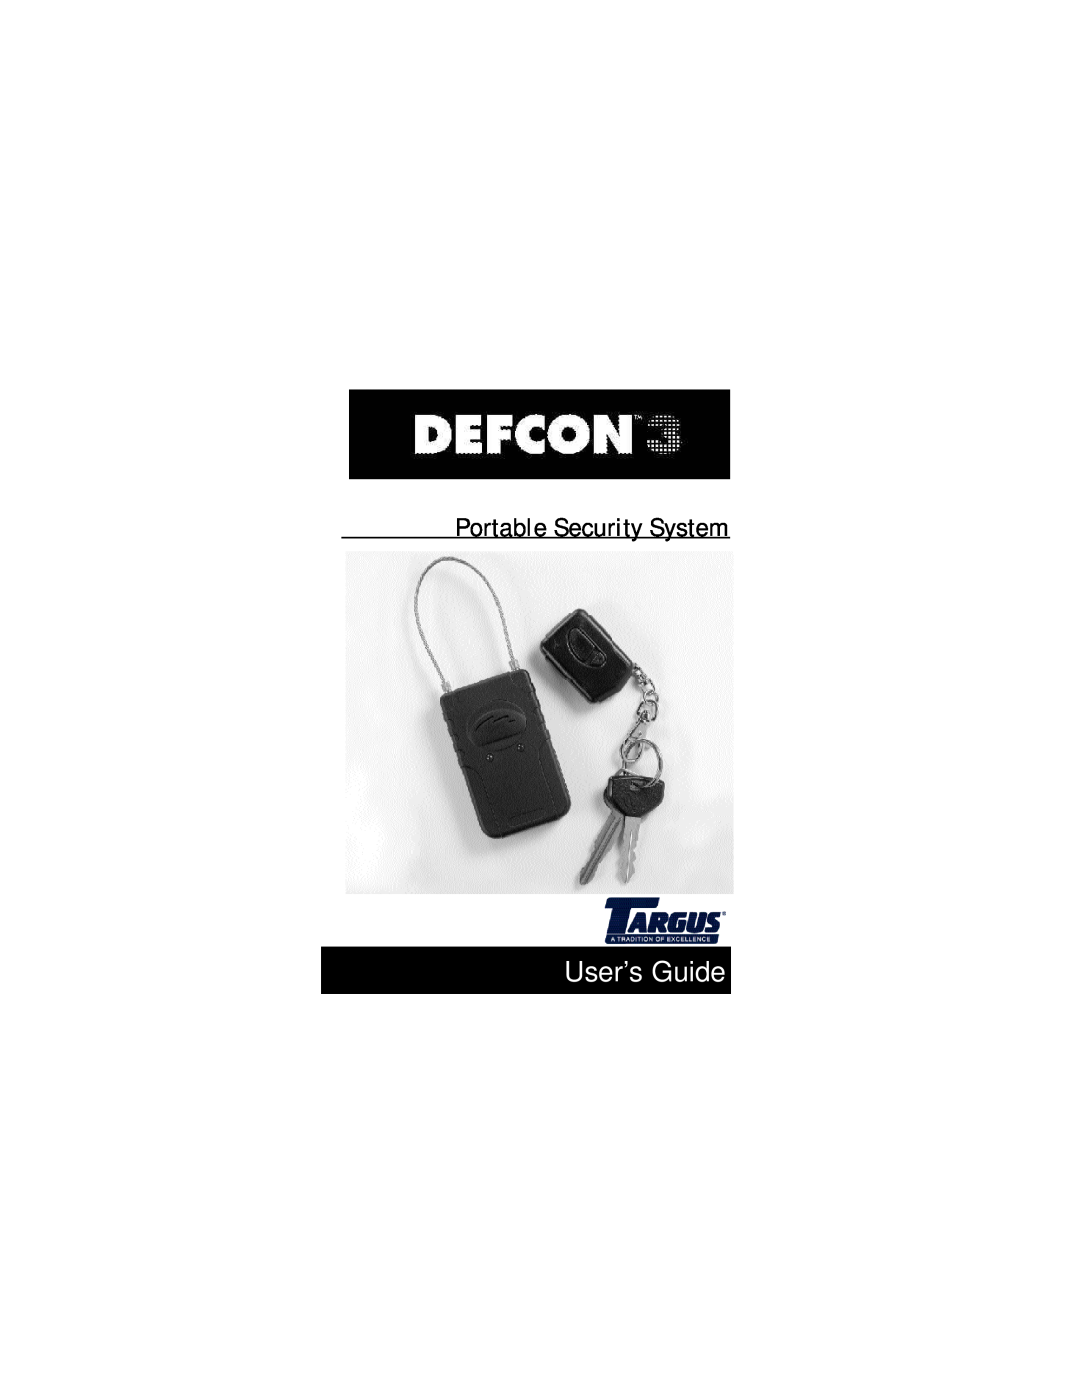 Targus DEFCON 3 manual User’s Guide, Portable Security System 